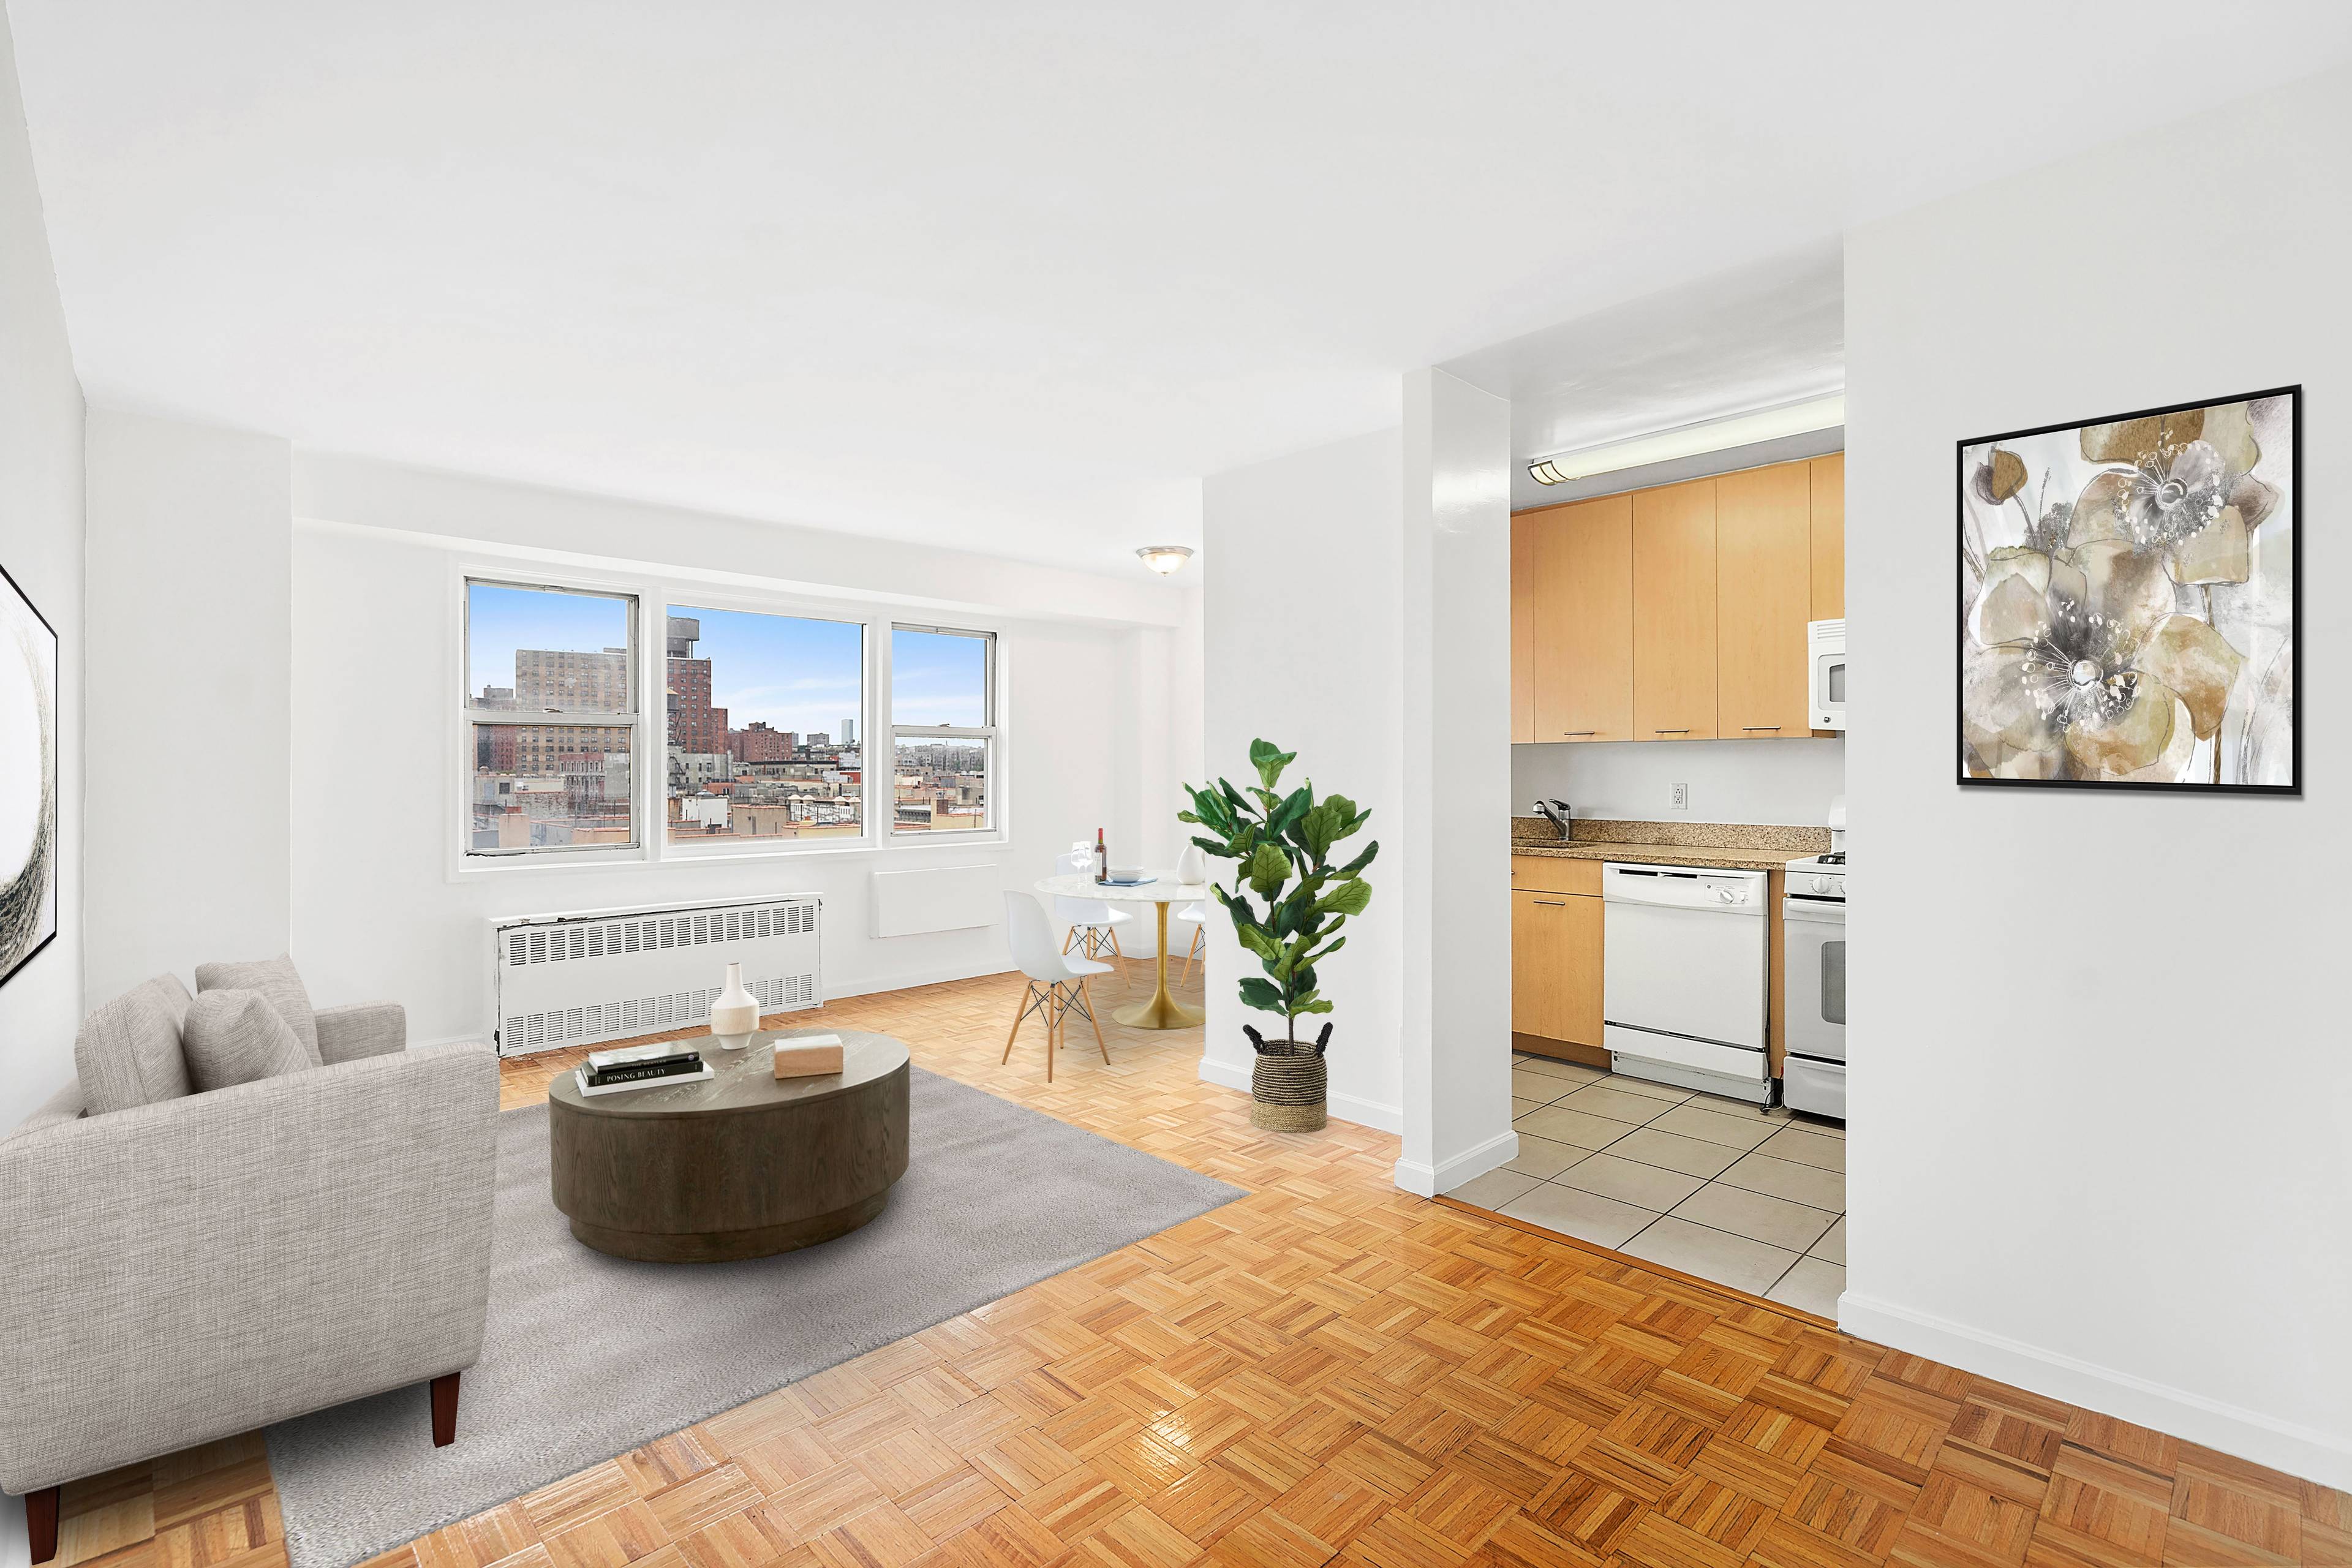 Apartment 16A is a sunny and spacious 1 bedroom apartment at Savoy Park in Harlem.